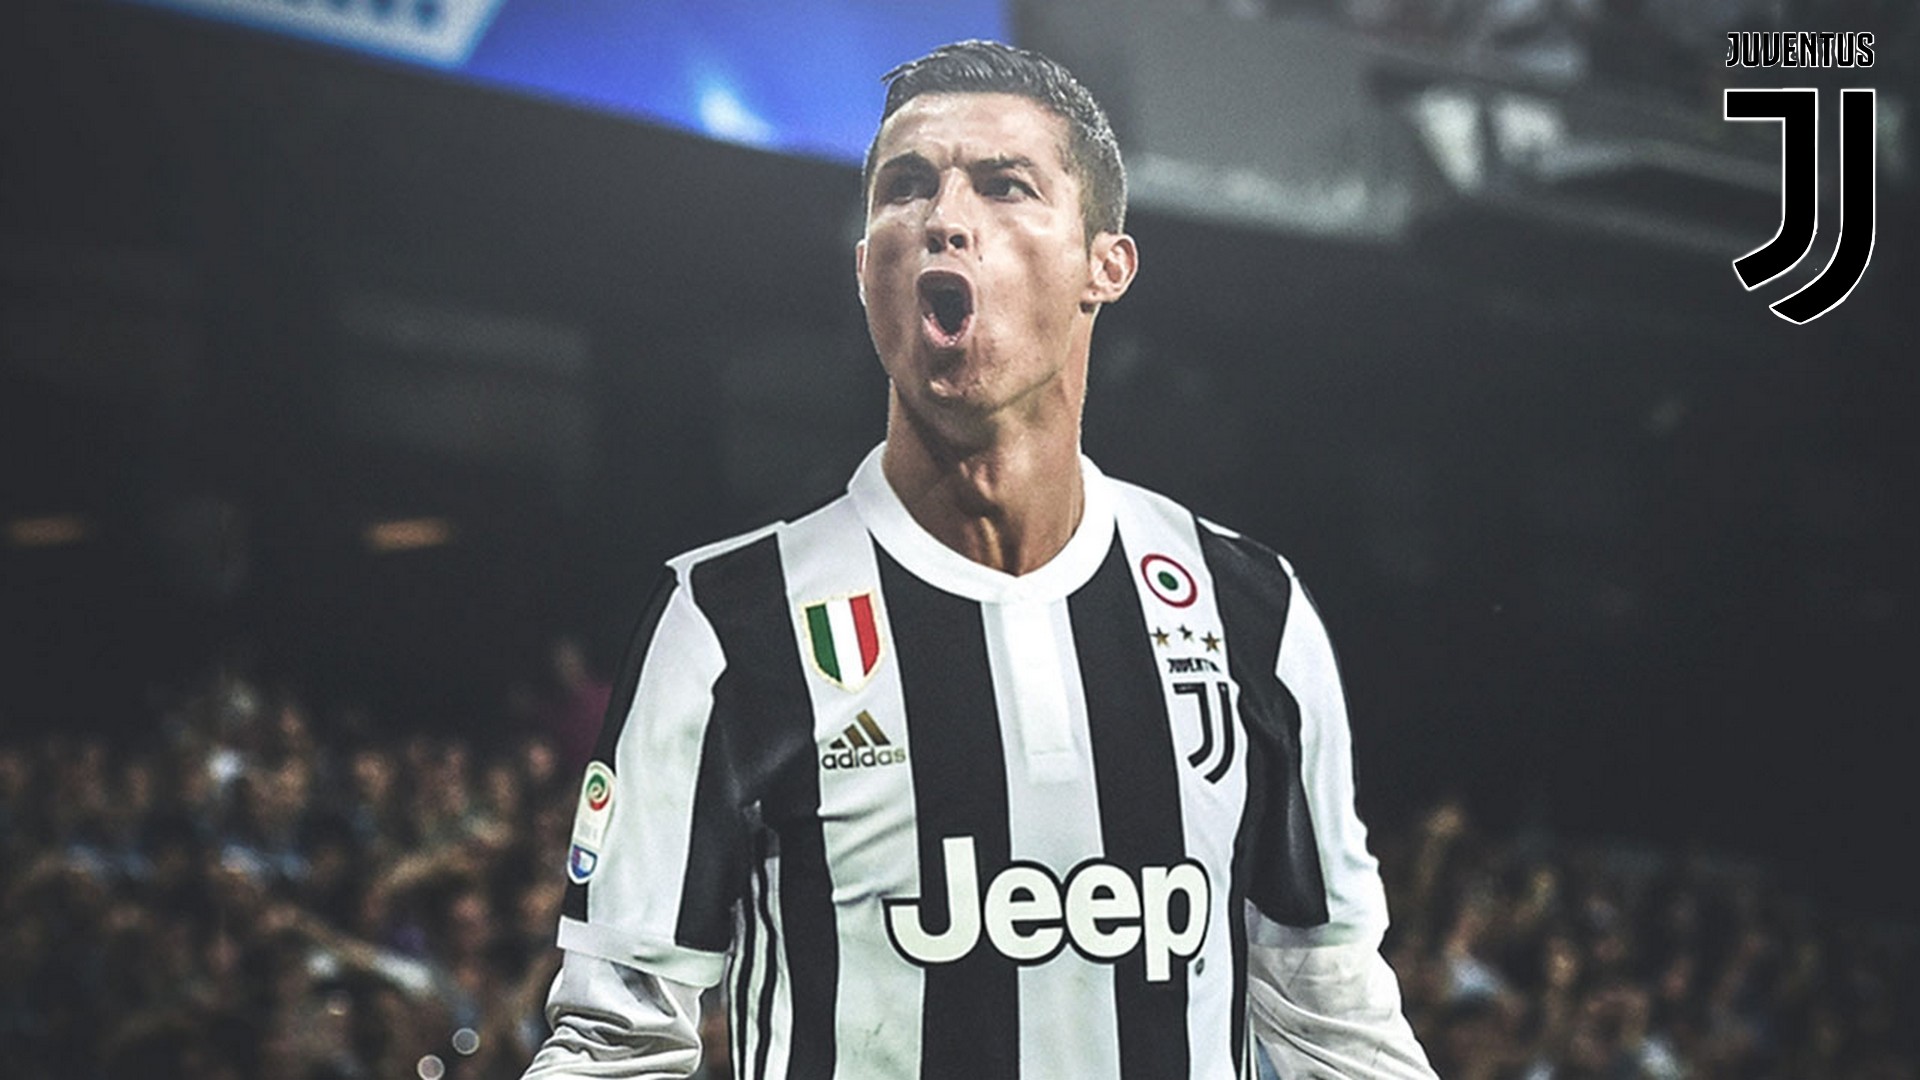 Wallpaper Desktop Ronaldo 7 Juventus HD With Resolution 1920X1080 pixel. You can make this wallpaper for your Mac or Windows Desktop Background, iPhone, Android or Tablet and another Smartphone device for free